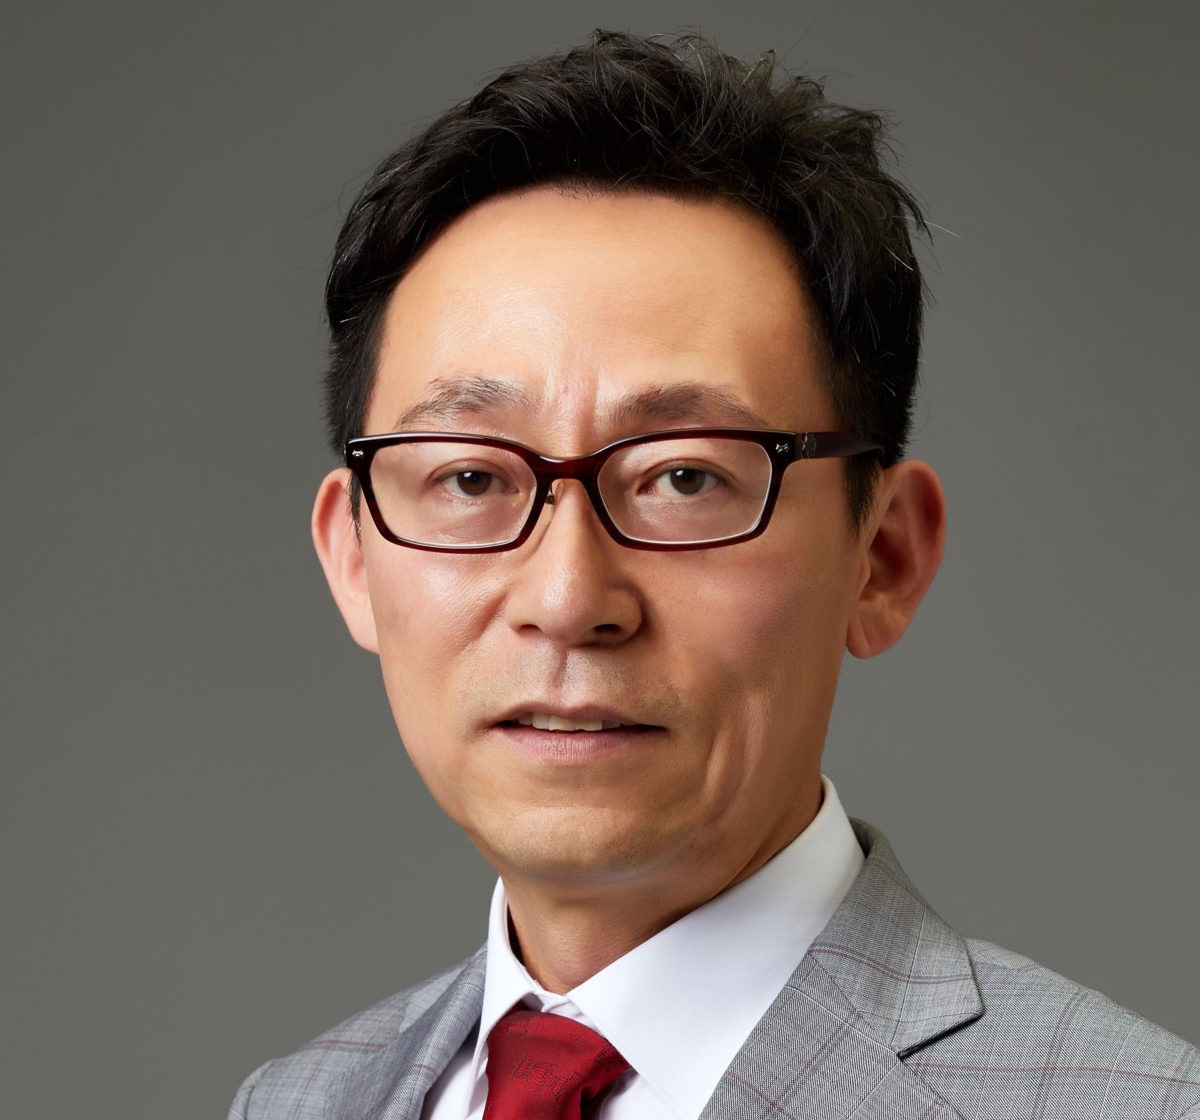 Hyungsoo (Hans) KIM, Director & Leader of Quantum Infra Innovation Team, KT, has agreed to speak on “Testbed in China and other Asian countries” at IQT The Hague